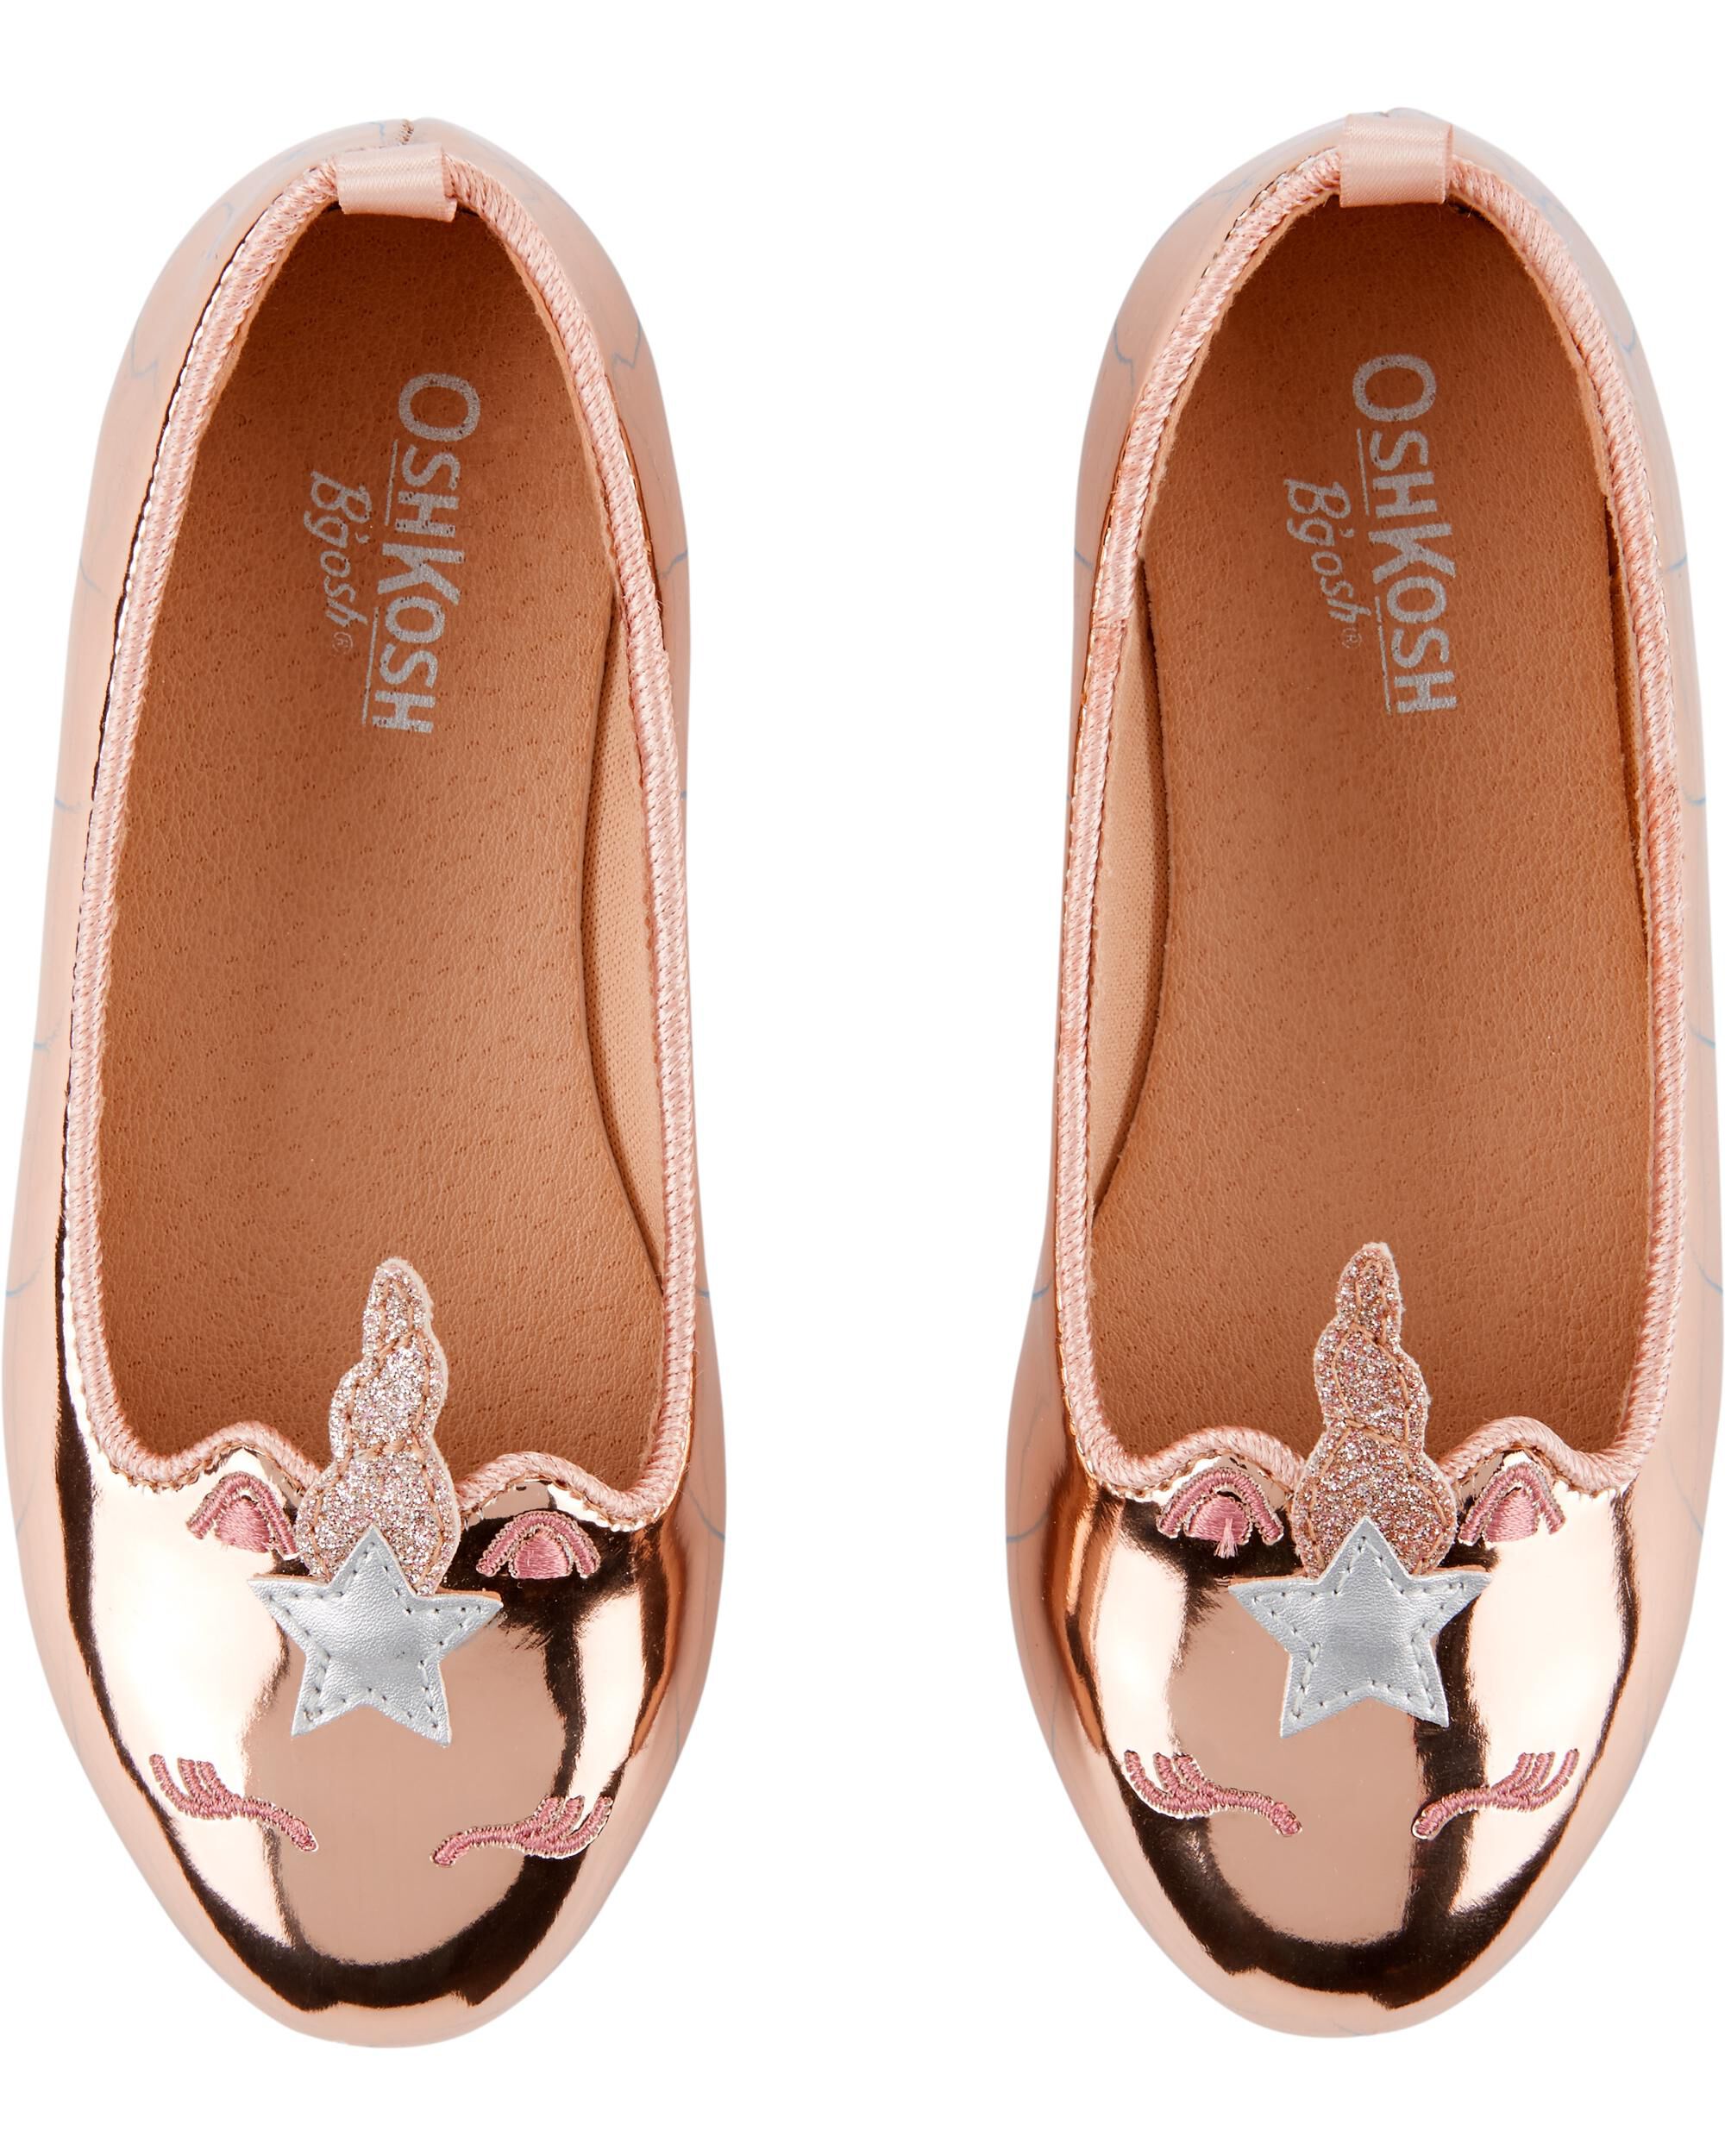 gold ballet shoes for toddlers